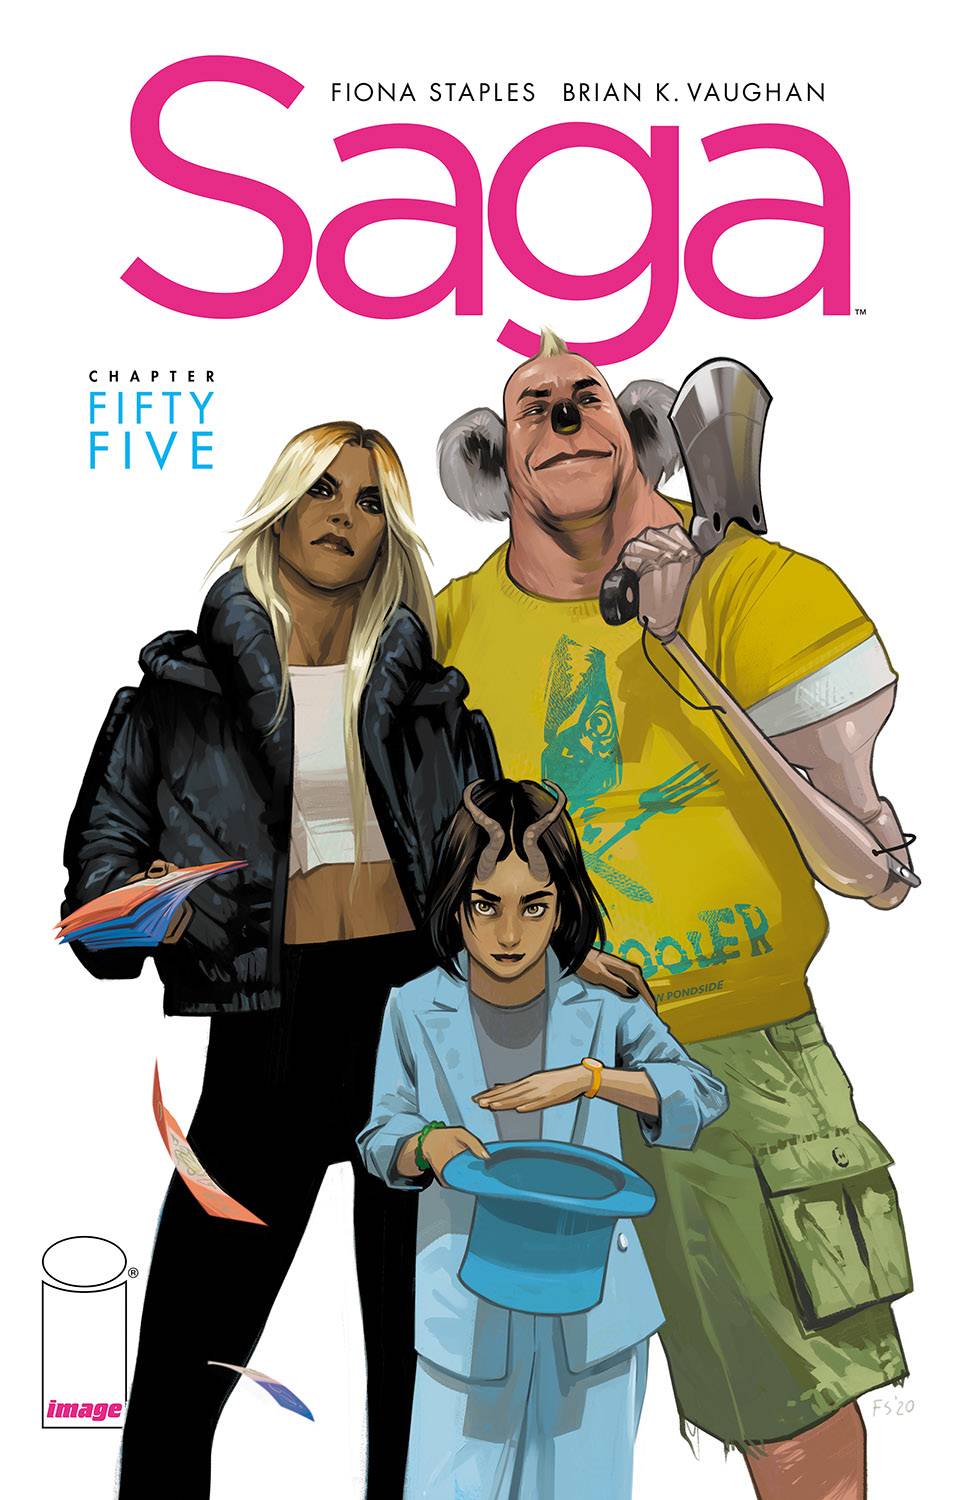 Photo of Saga Issue 55 comic sold by Stronghold Collectibles